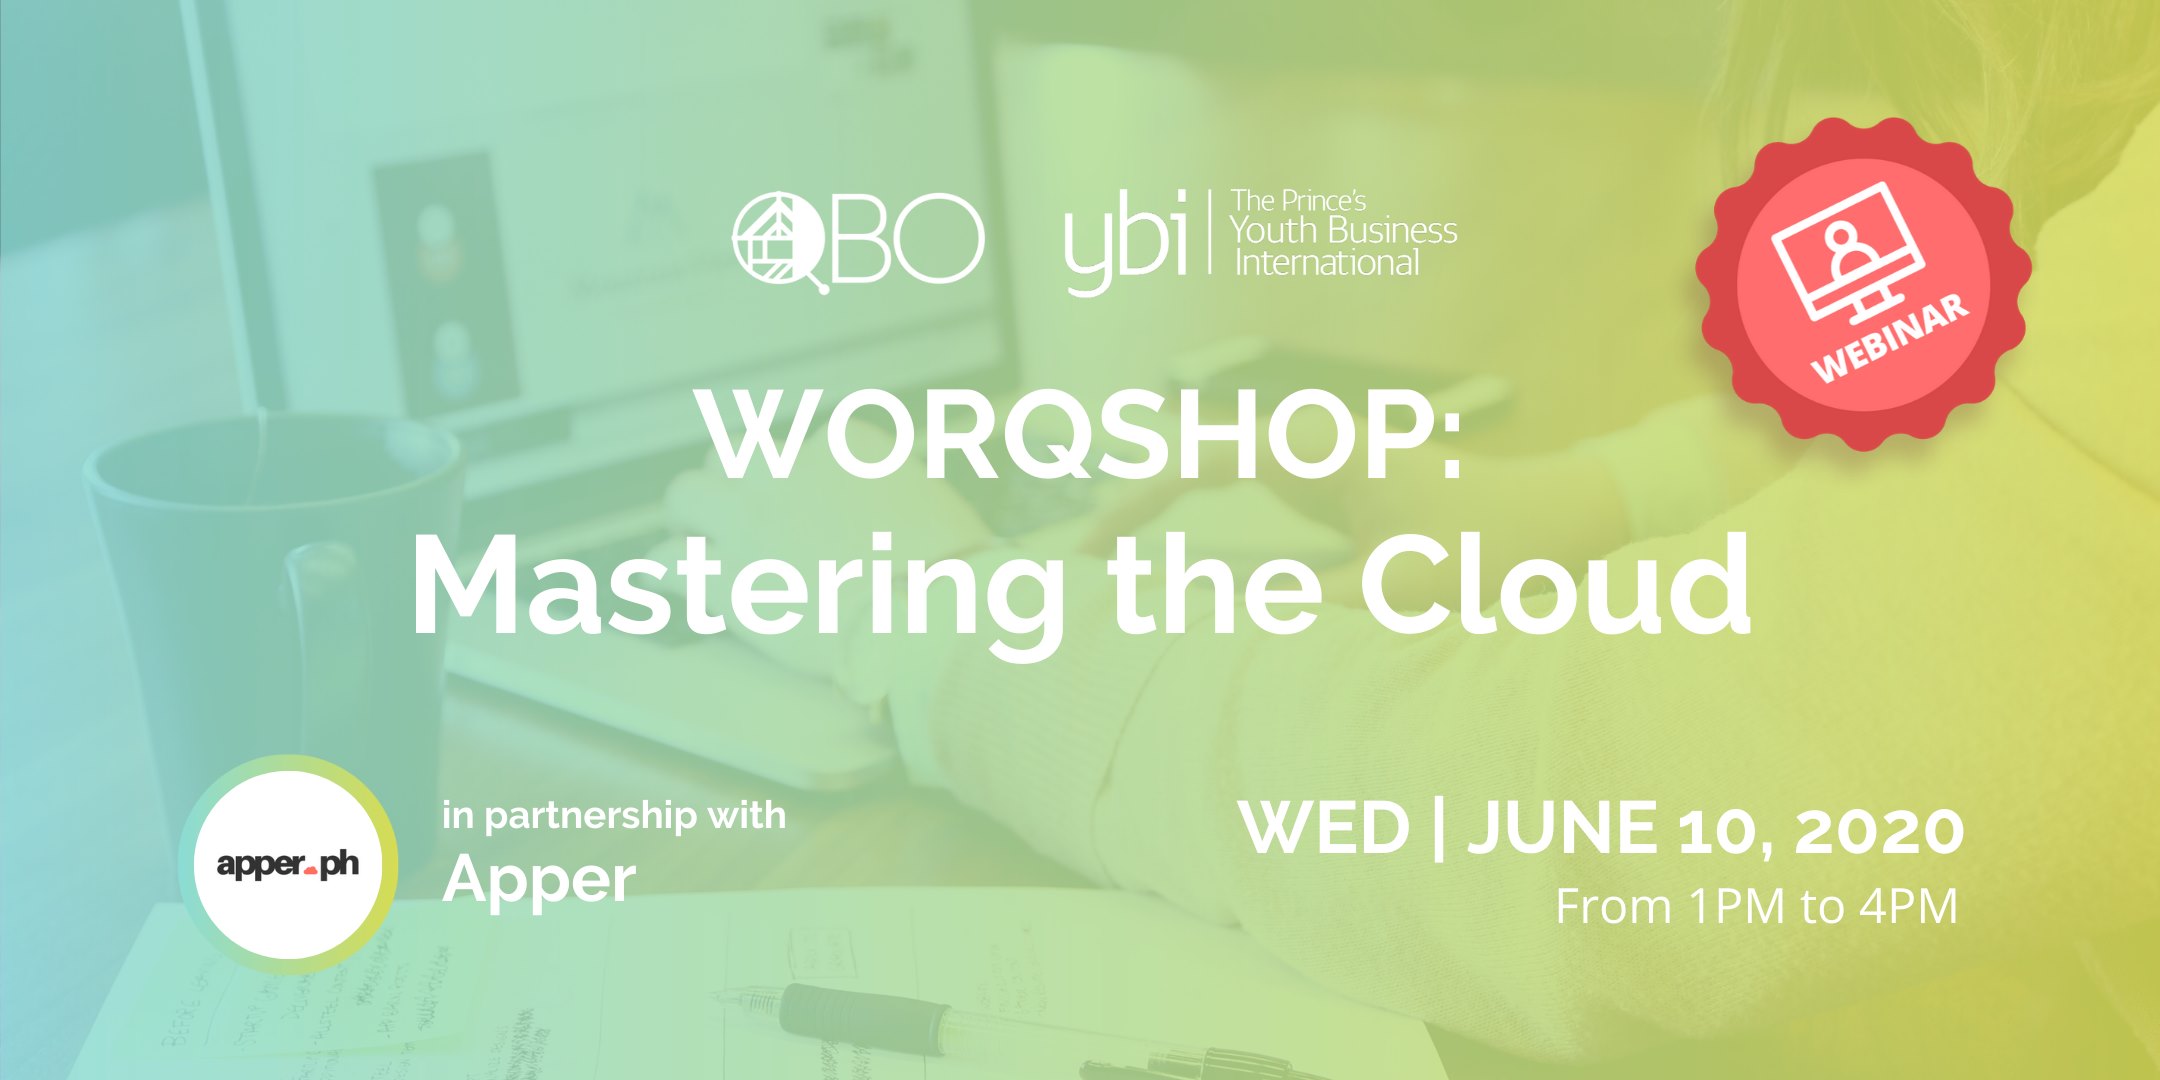 apper.ph conducts first webinar on Mastering the Cloud